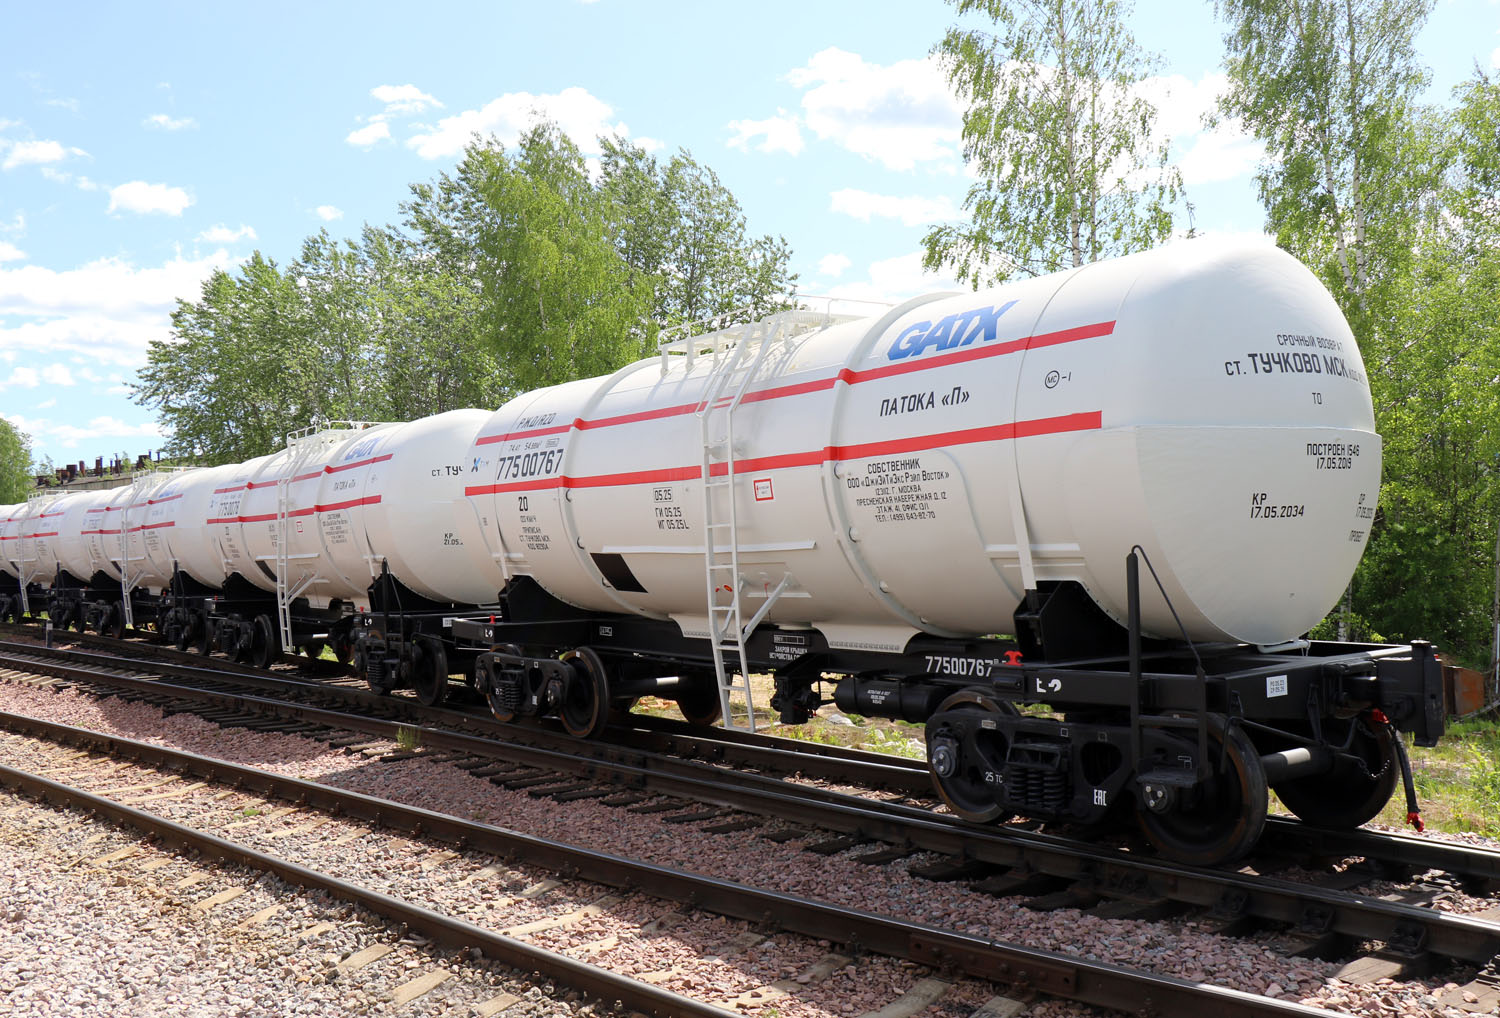 UWC stainless steel tank car for molasses and vegetable oils